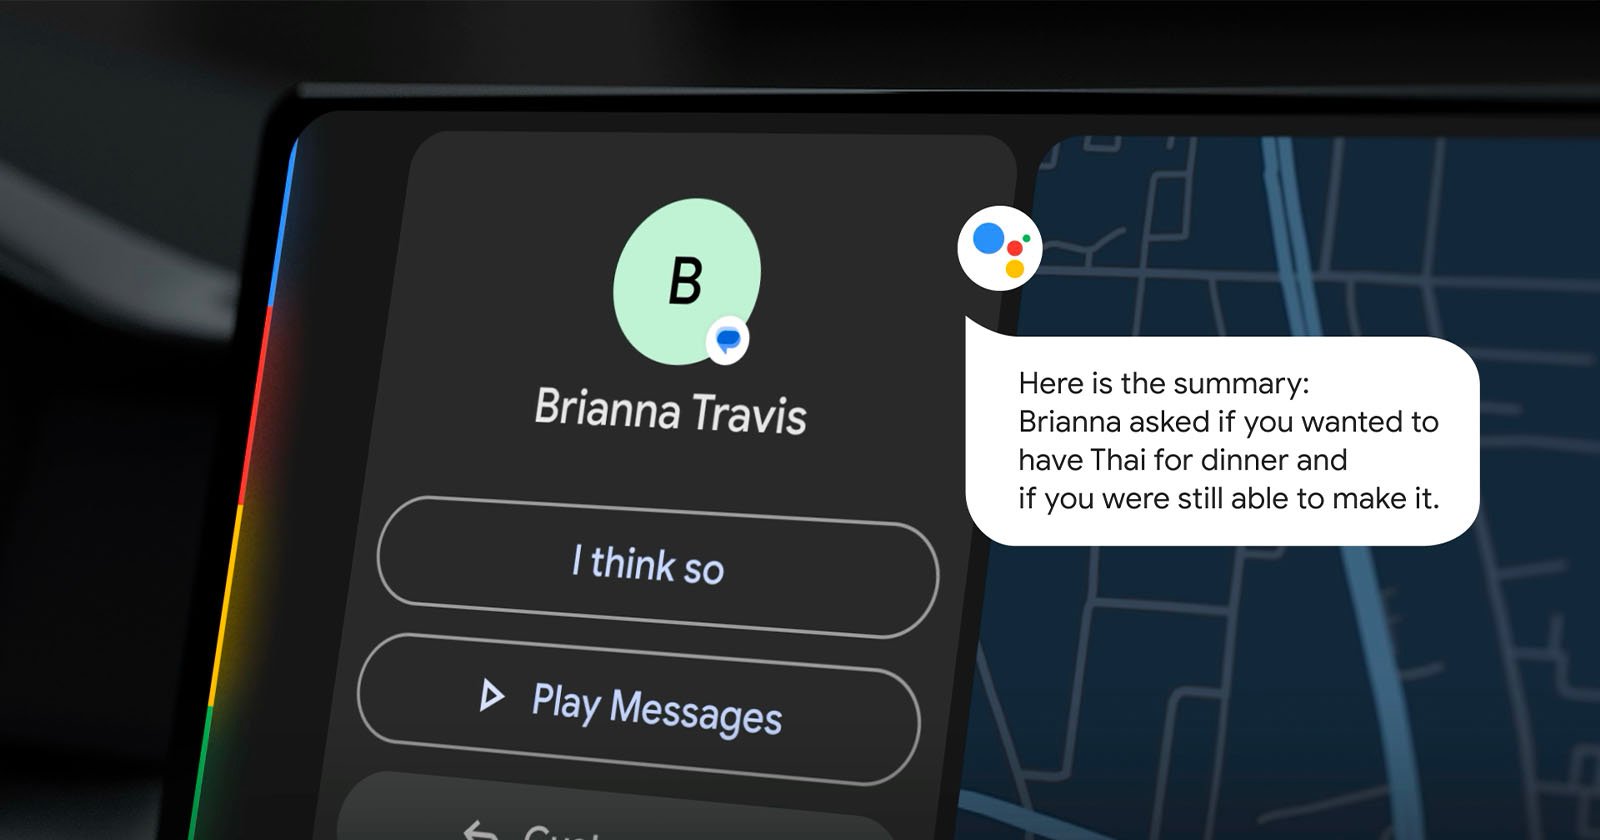 Google Announces Intuitive Circle to Search Feature at Samsung Unpacked